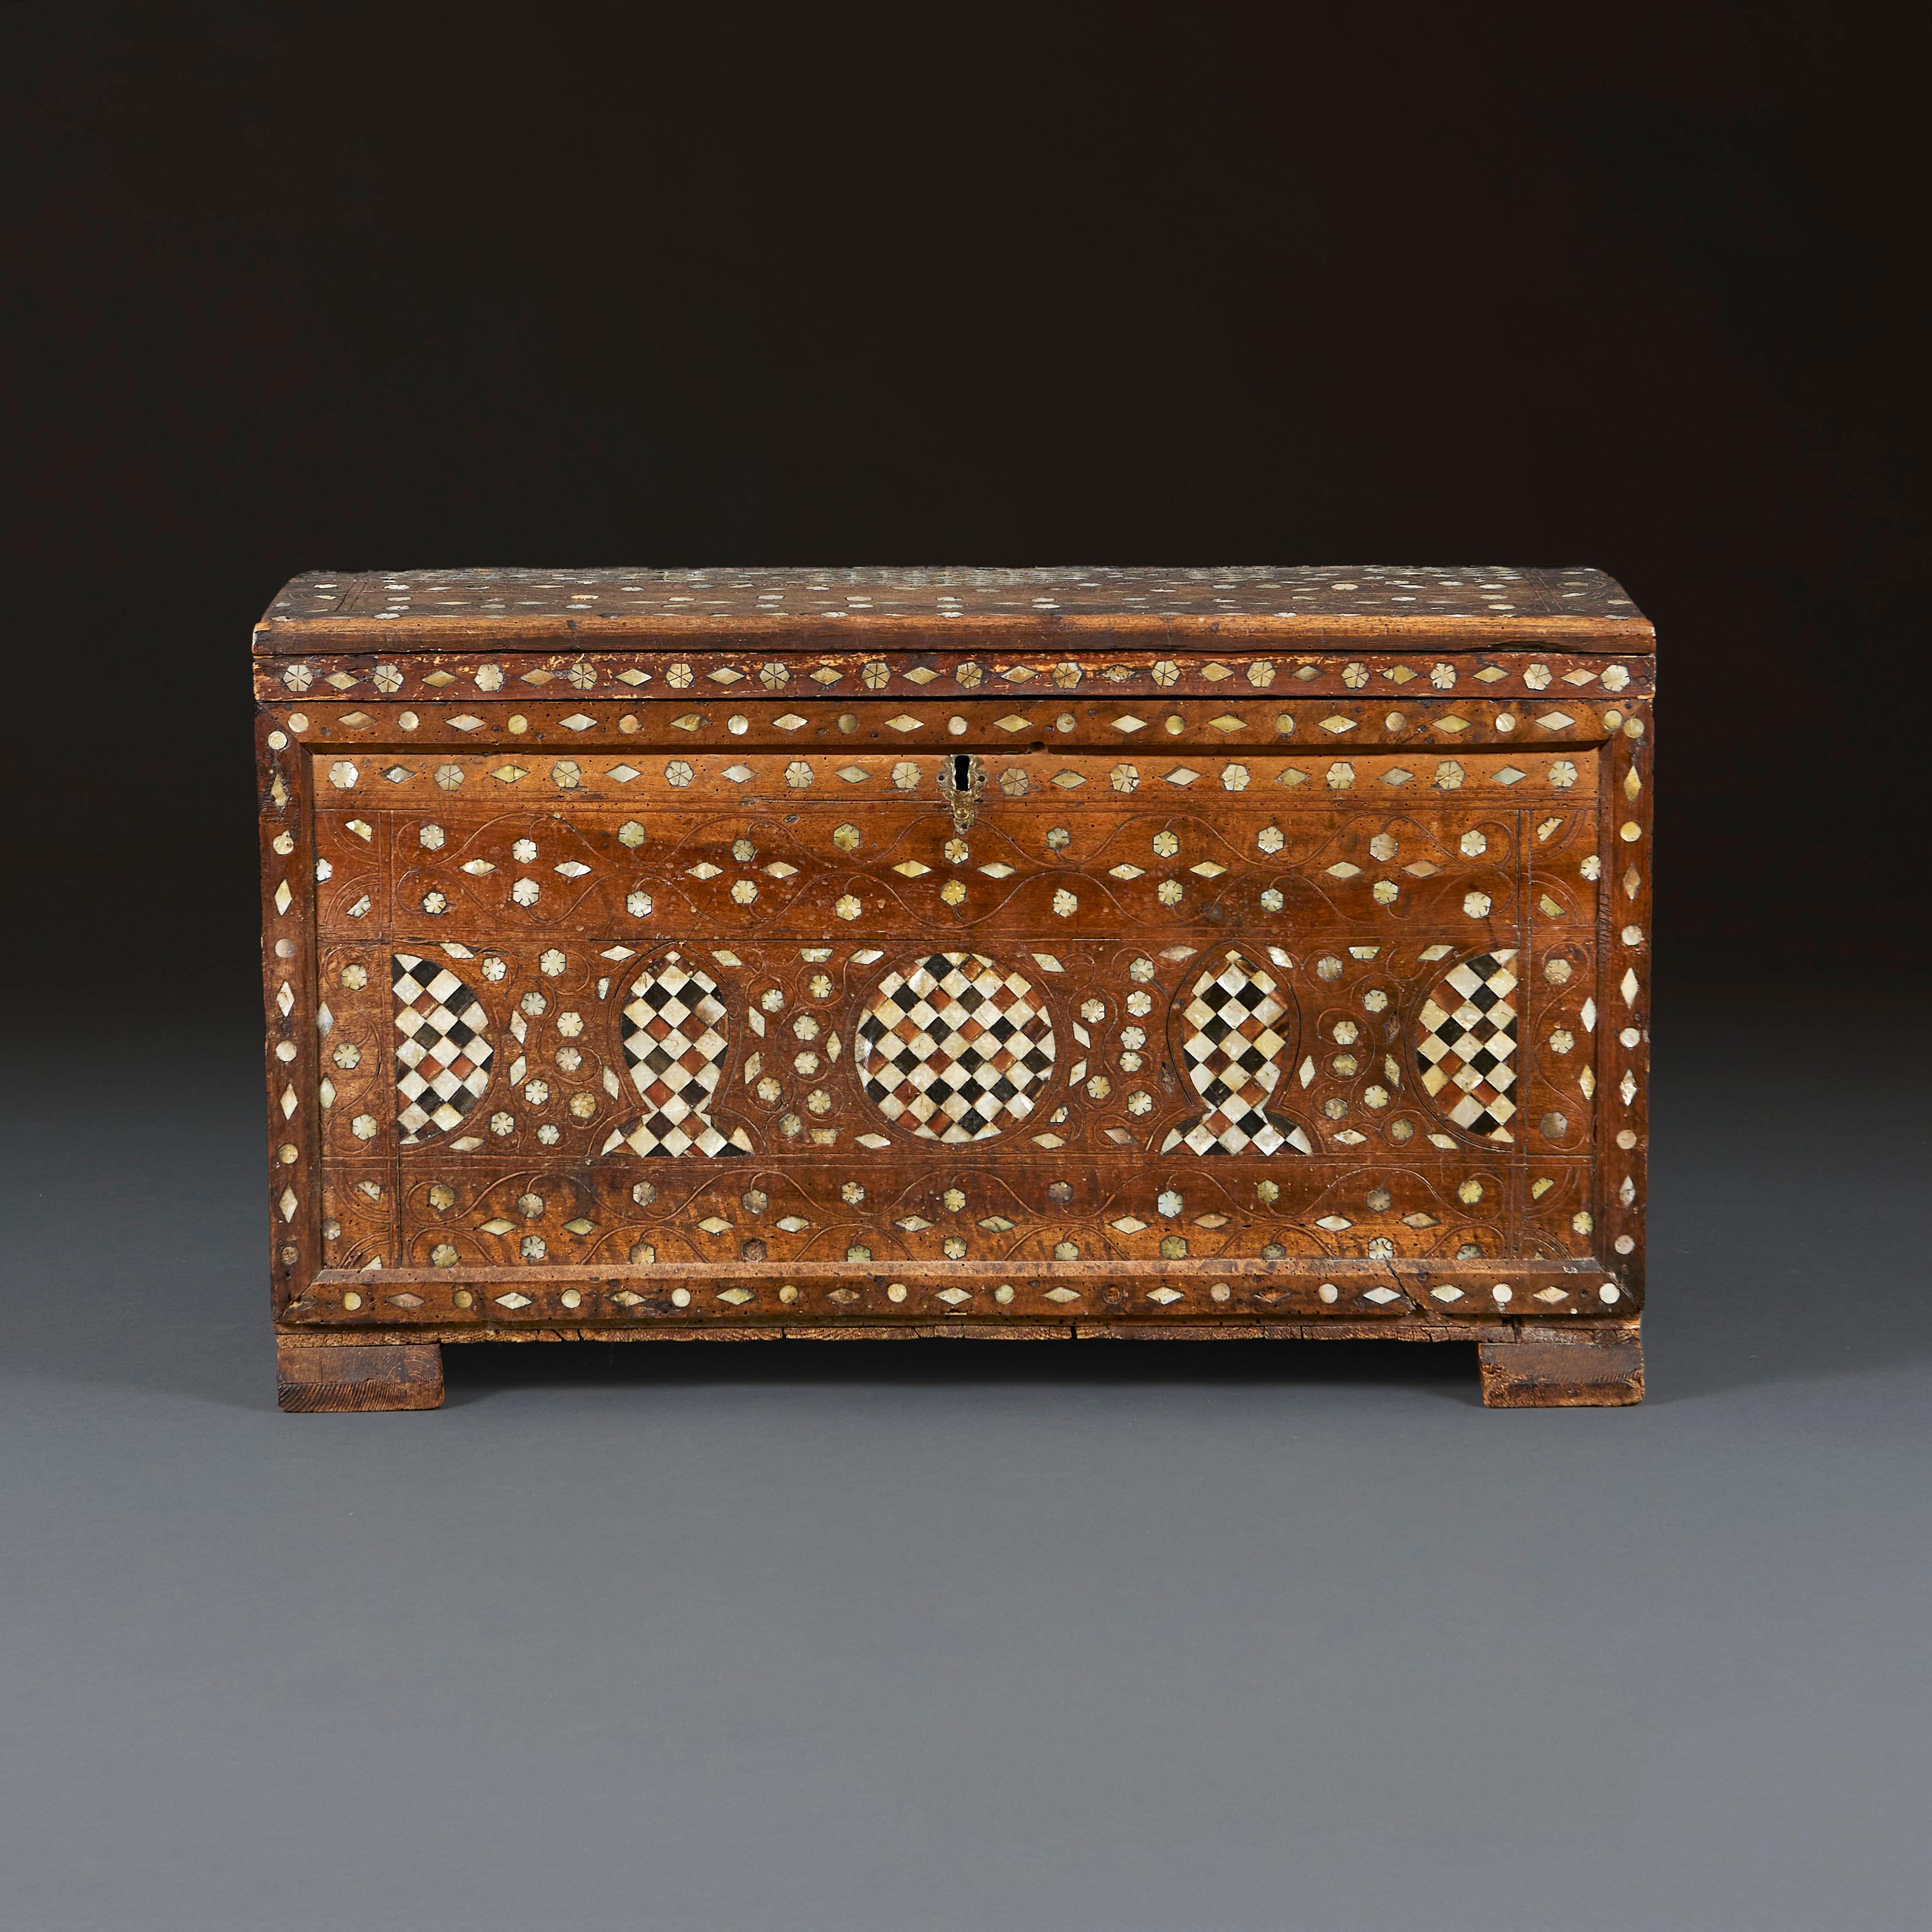 Turkey, circa 1750

A mid eighteenth century cypress wood trunk, inlaid with faux tortoiseshell and mother of pearl throughout.

Height 58.00cm
Width 101.00cm
Depth 54.00cm

